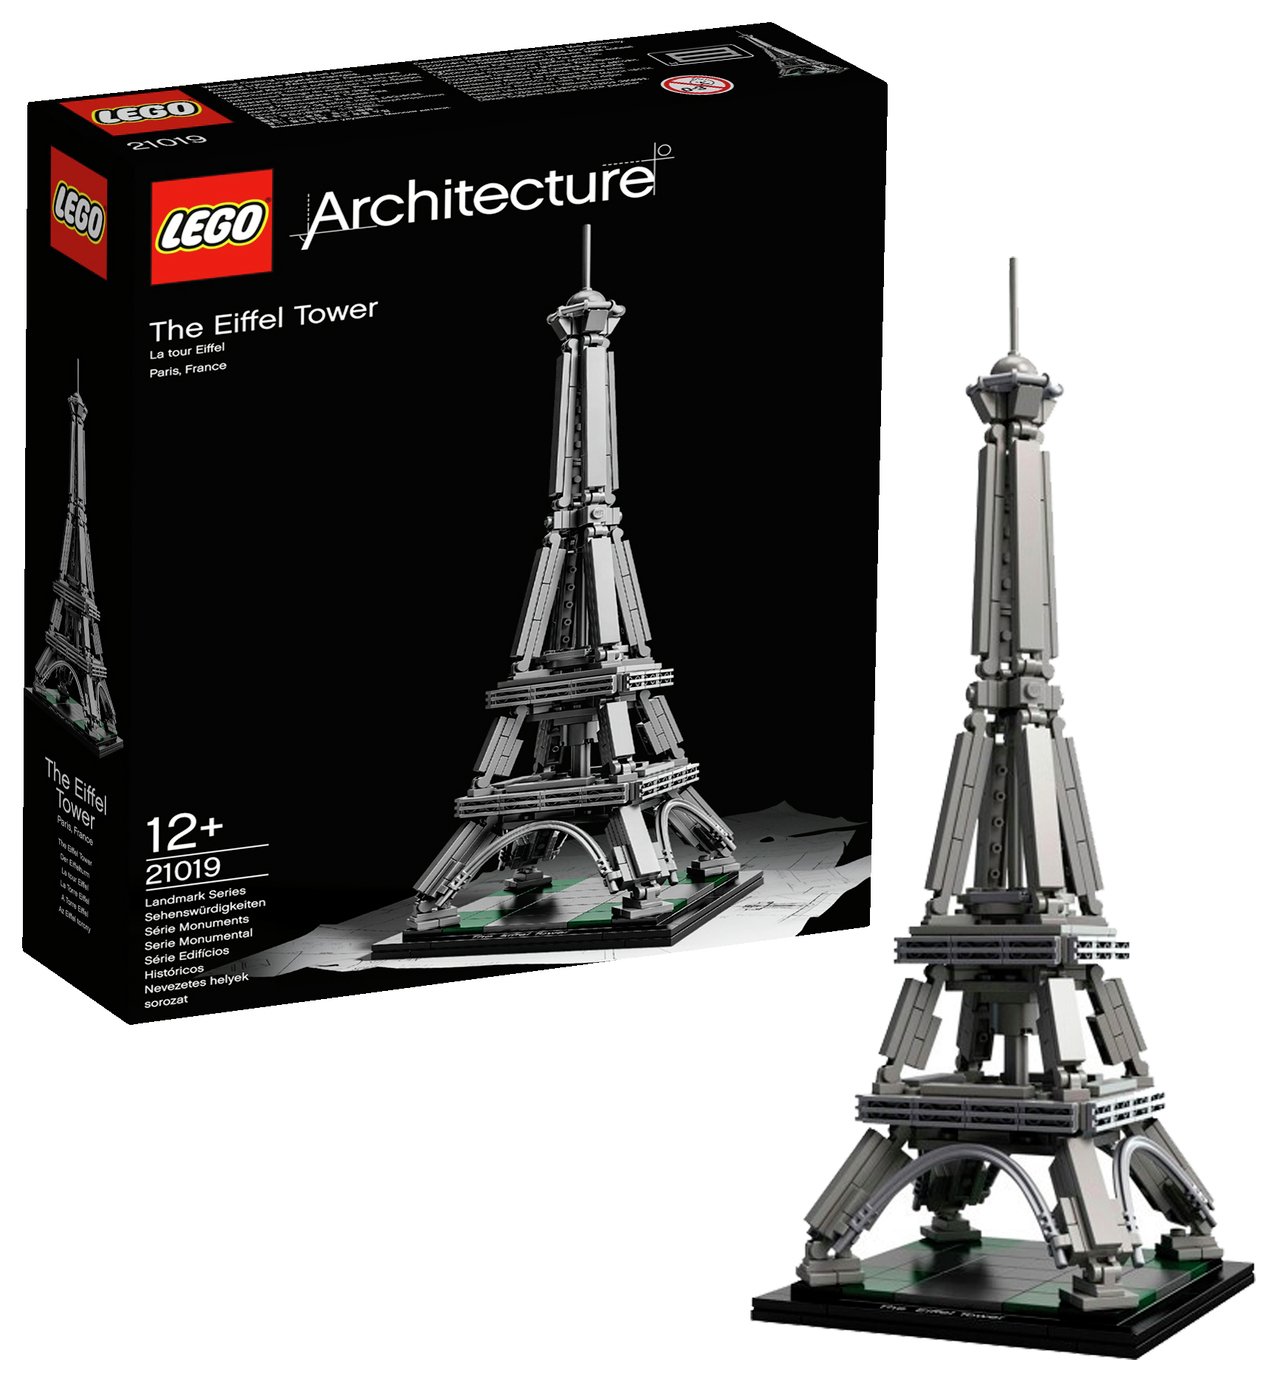 LEGO Architecture The Eiffel Tower - 21019